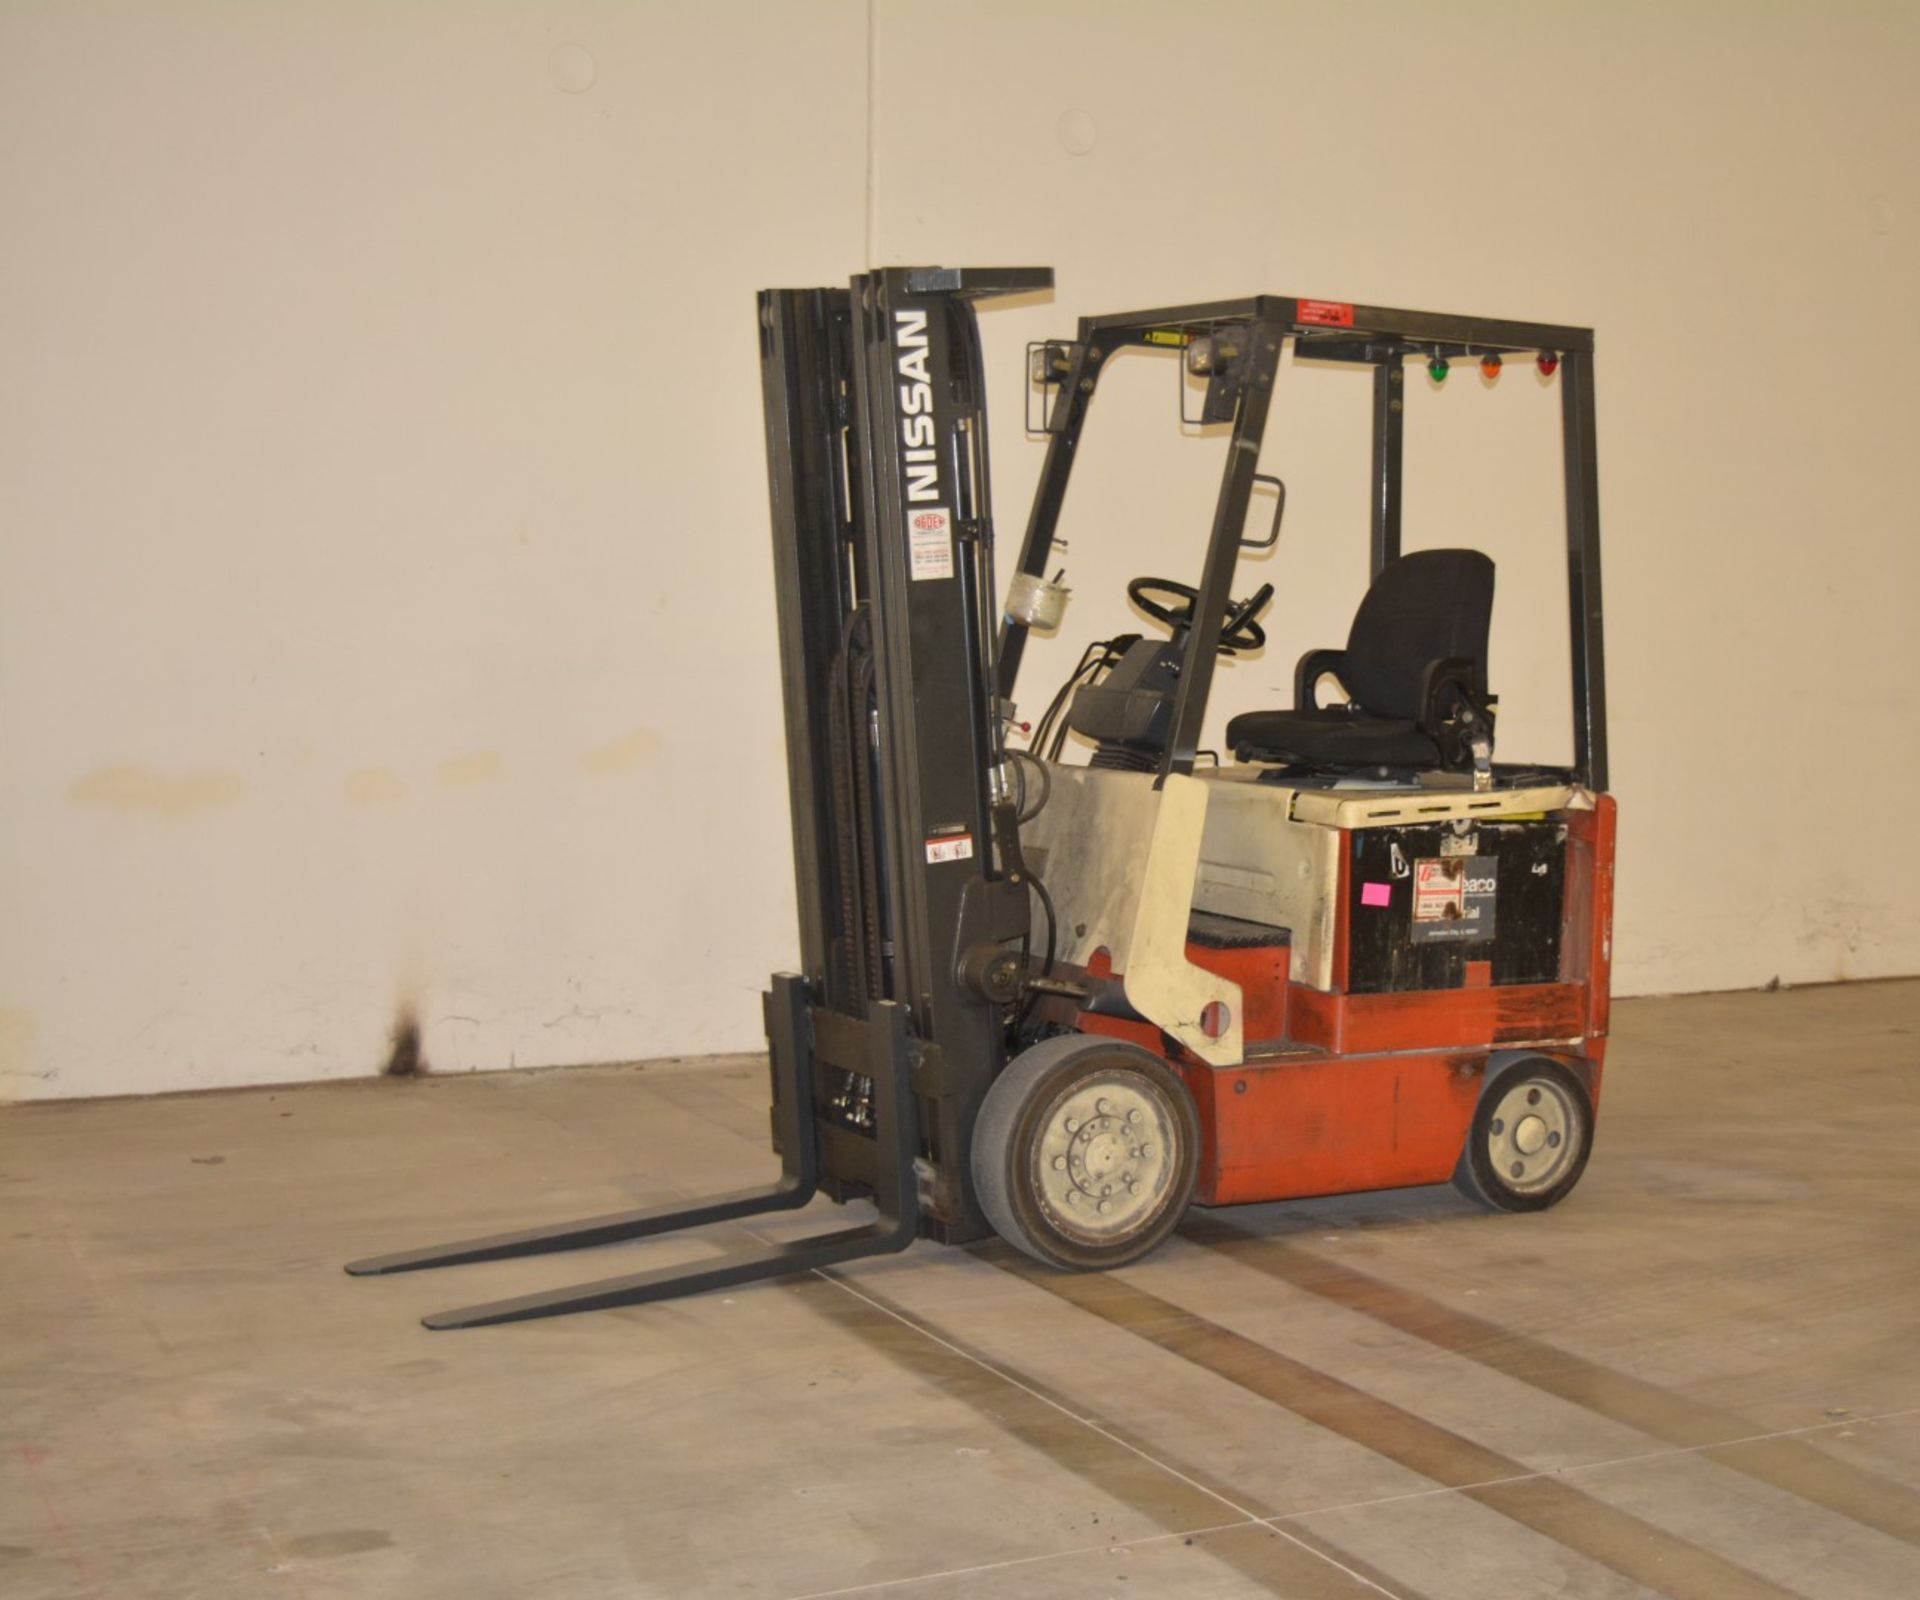 2005 NISSAN 4000 LBS CAPACITY ELECTRIC FORKLIFT, 2014 BATTERY, (WATCH VIDEO) - Image 5 of 5